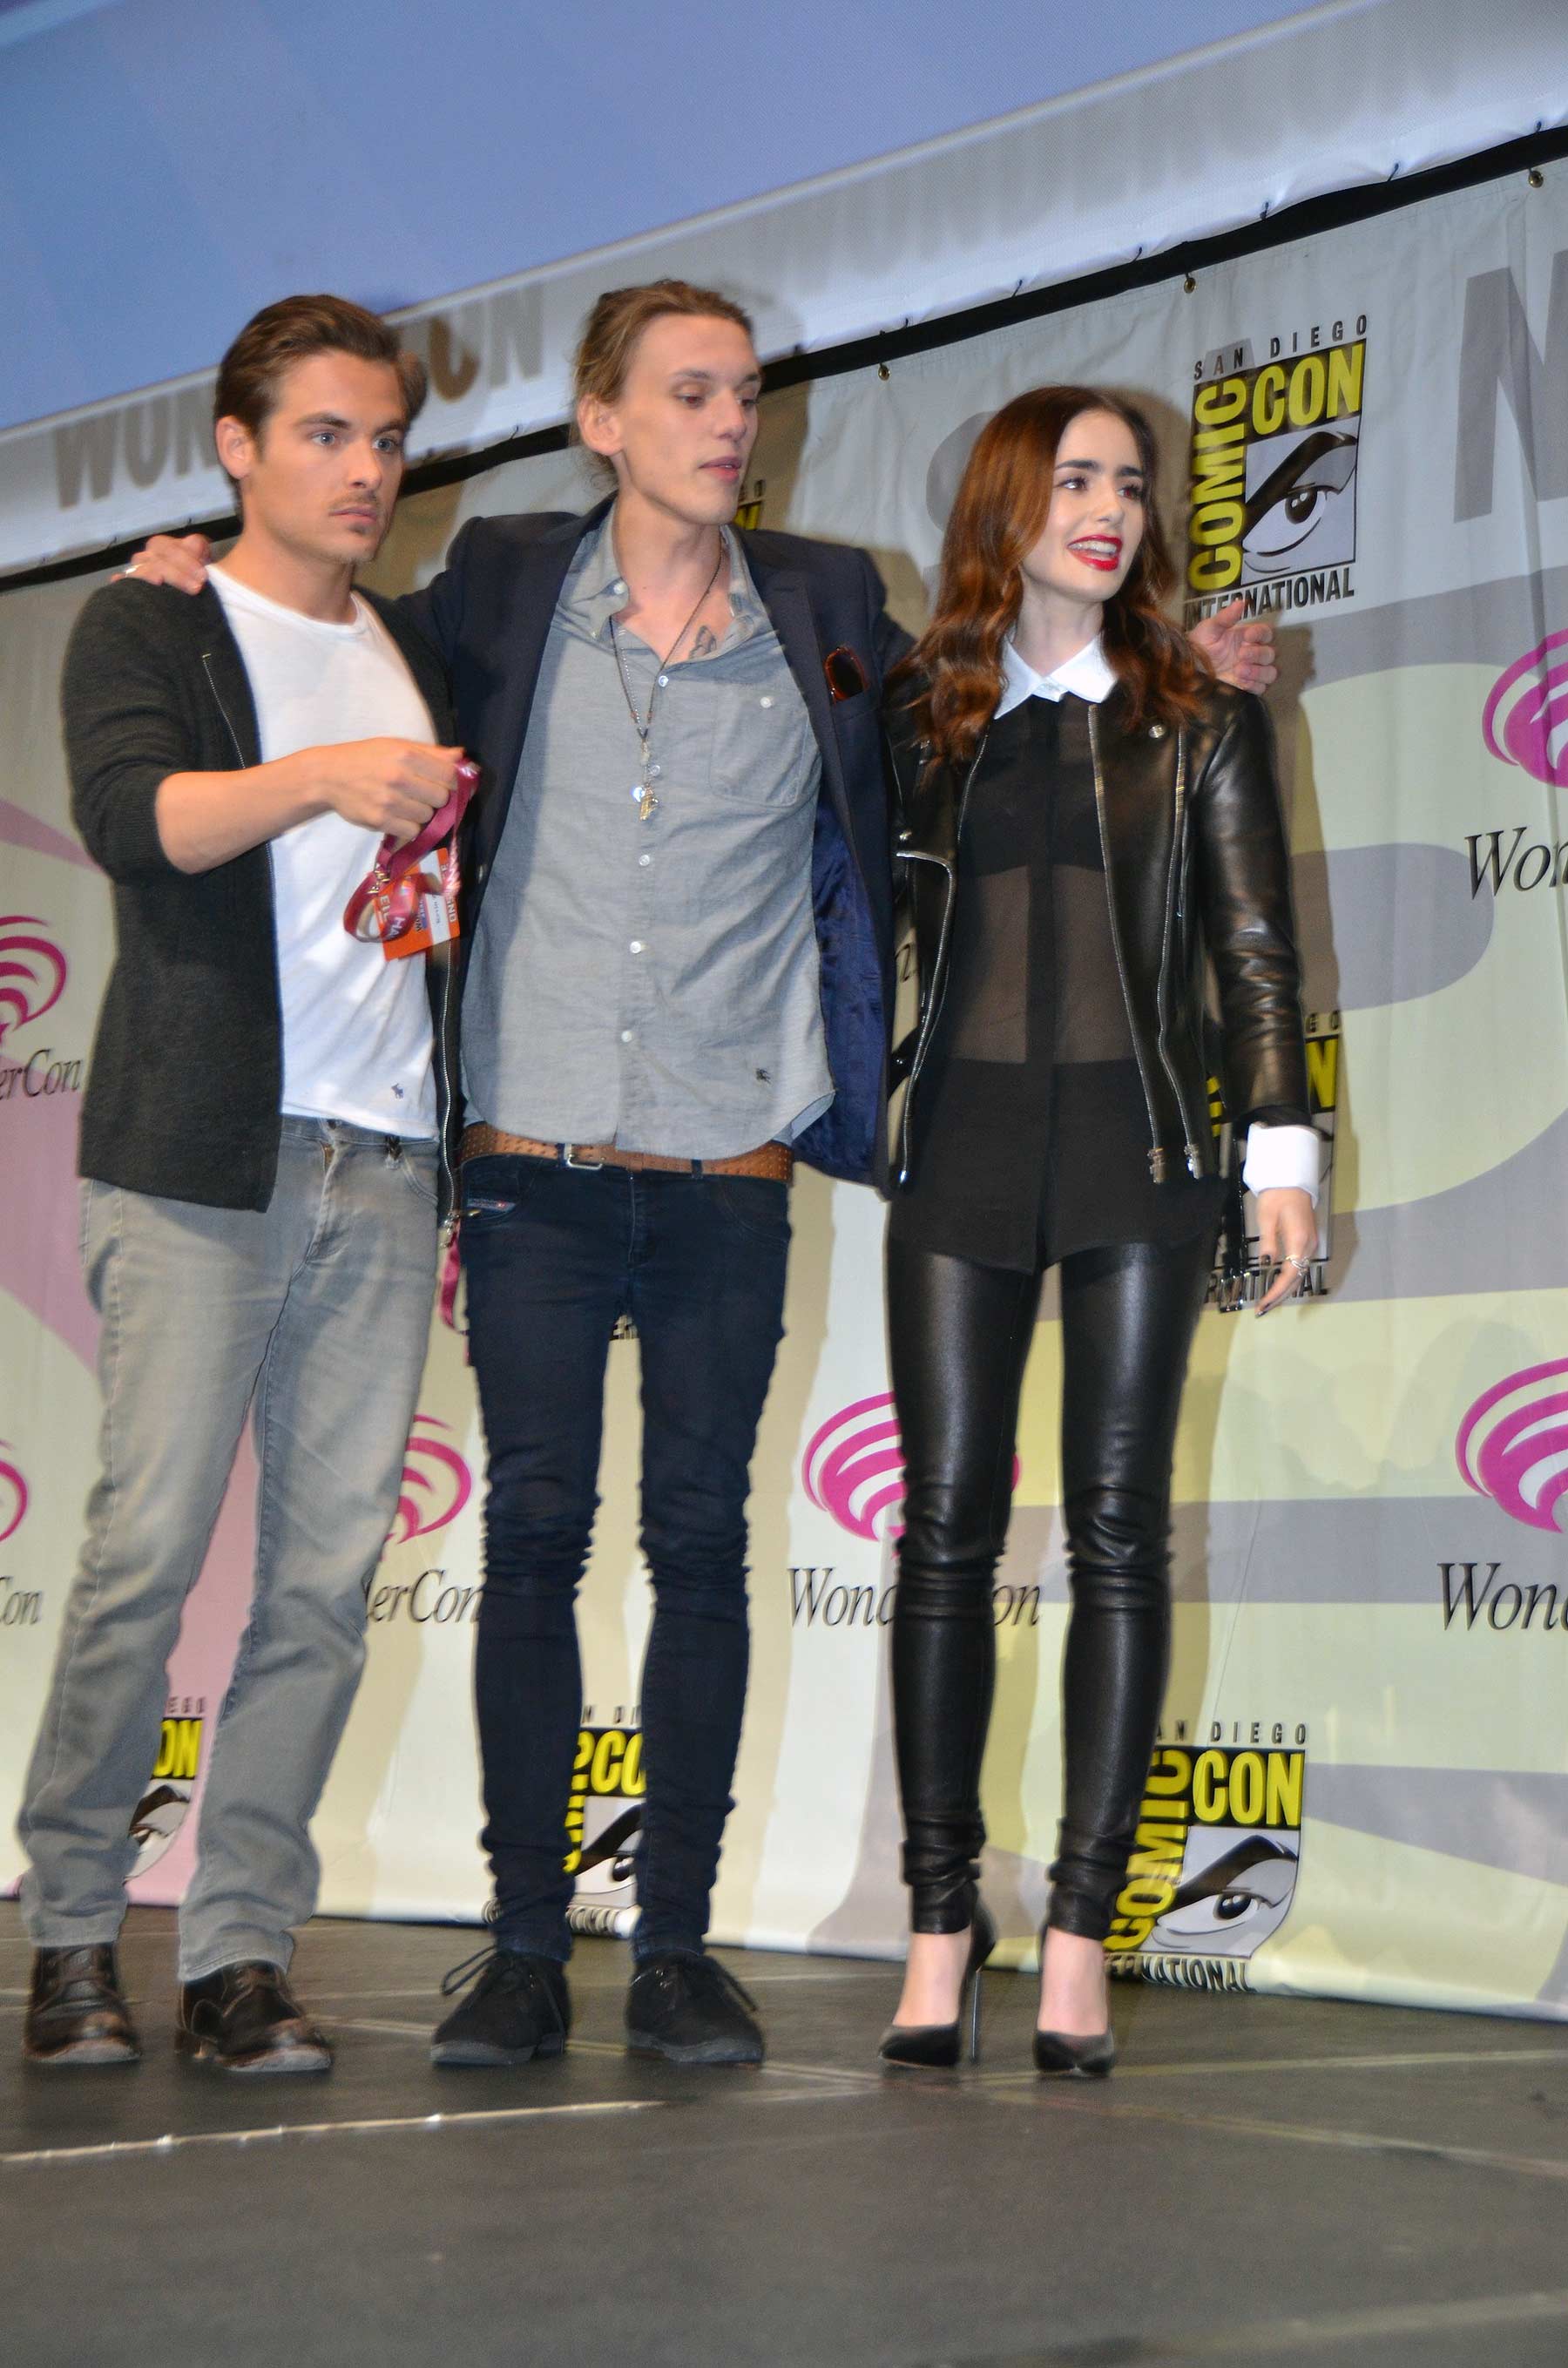 Lily Collins attends WonderCon 2013